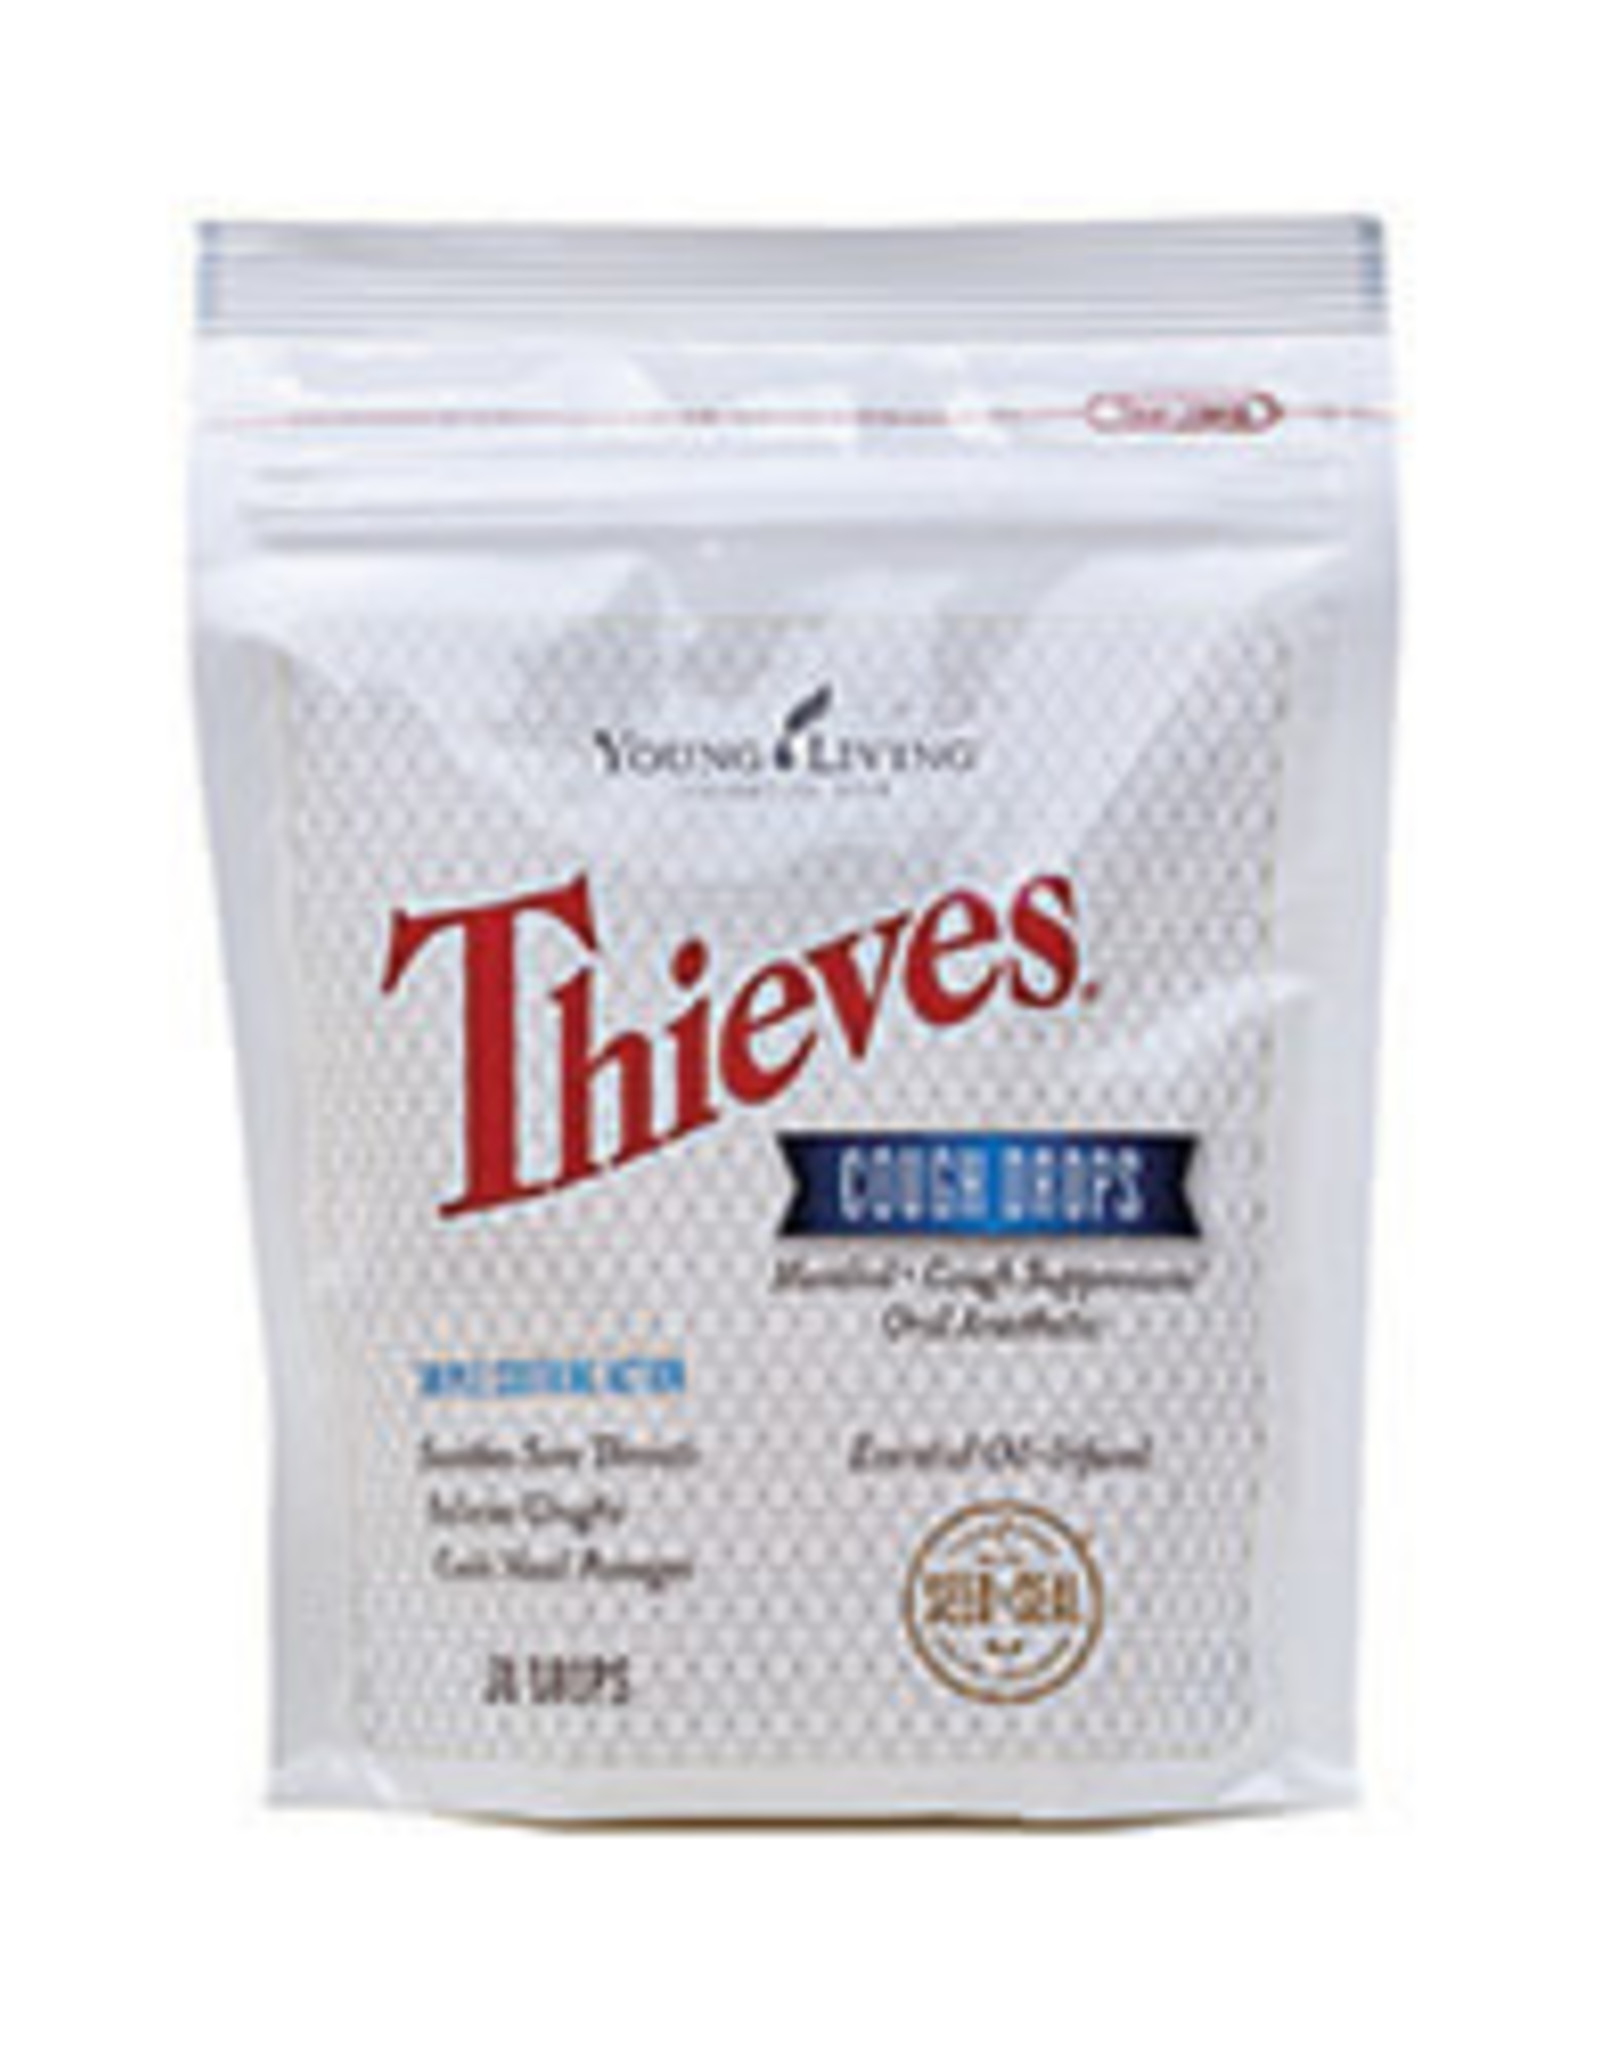 Young Living Thieves Cough Drops